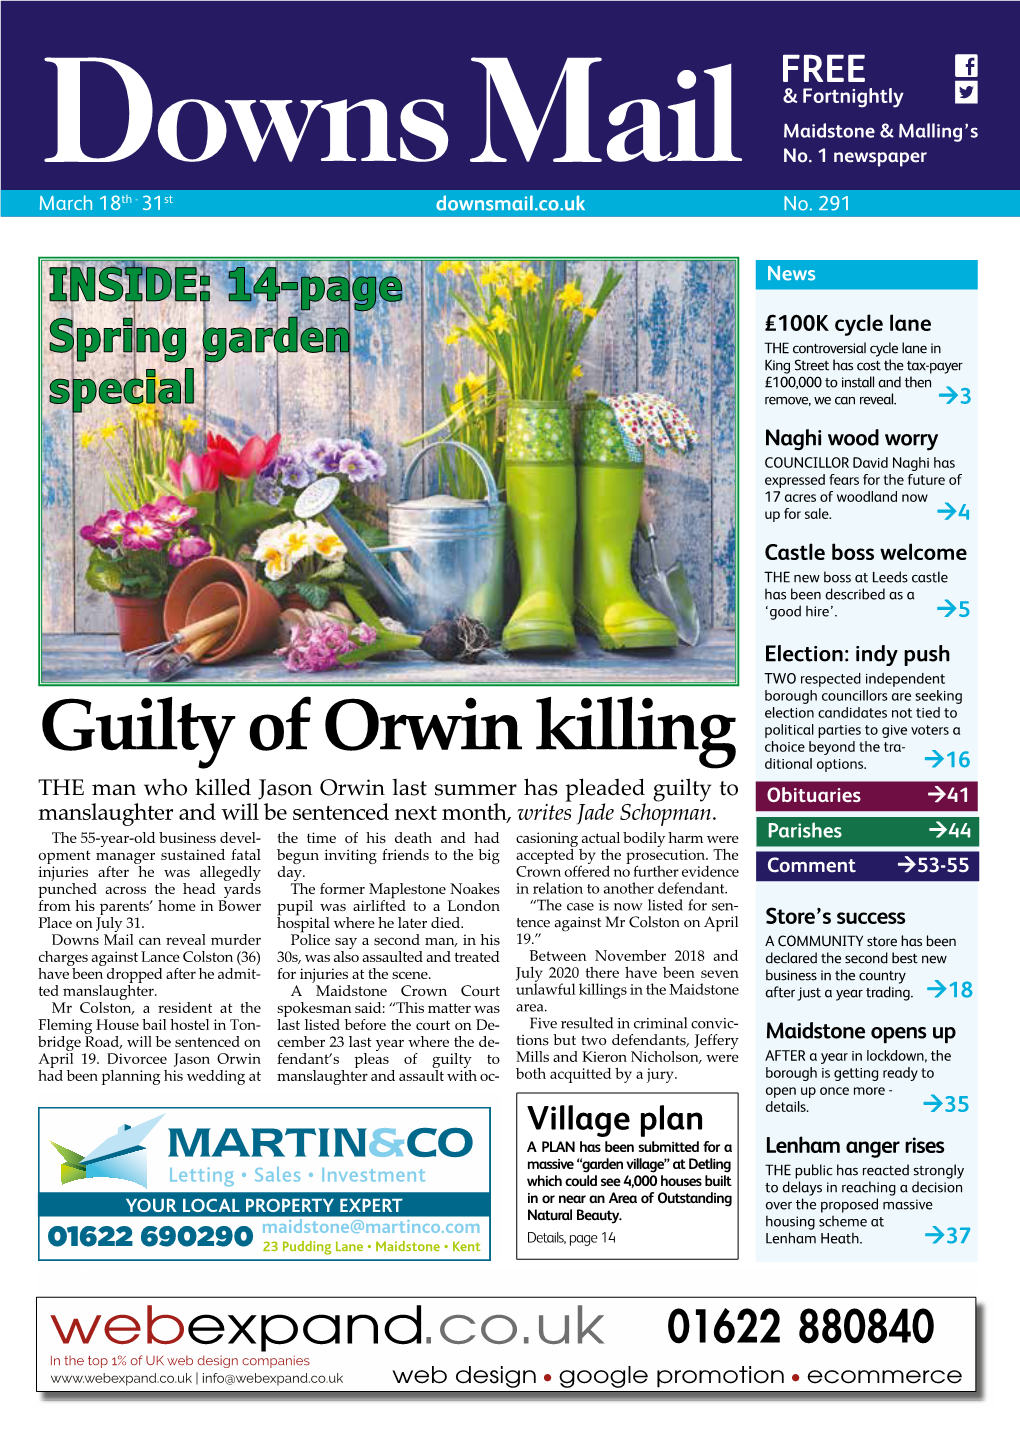 Guilty of Orwin Killing Choice Beyond the Tra- Country Road Have Been Made by the Local Borough Councillor